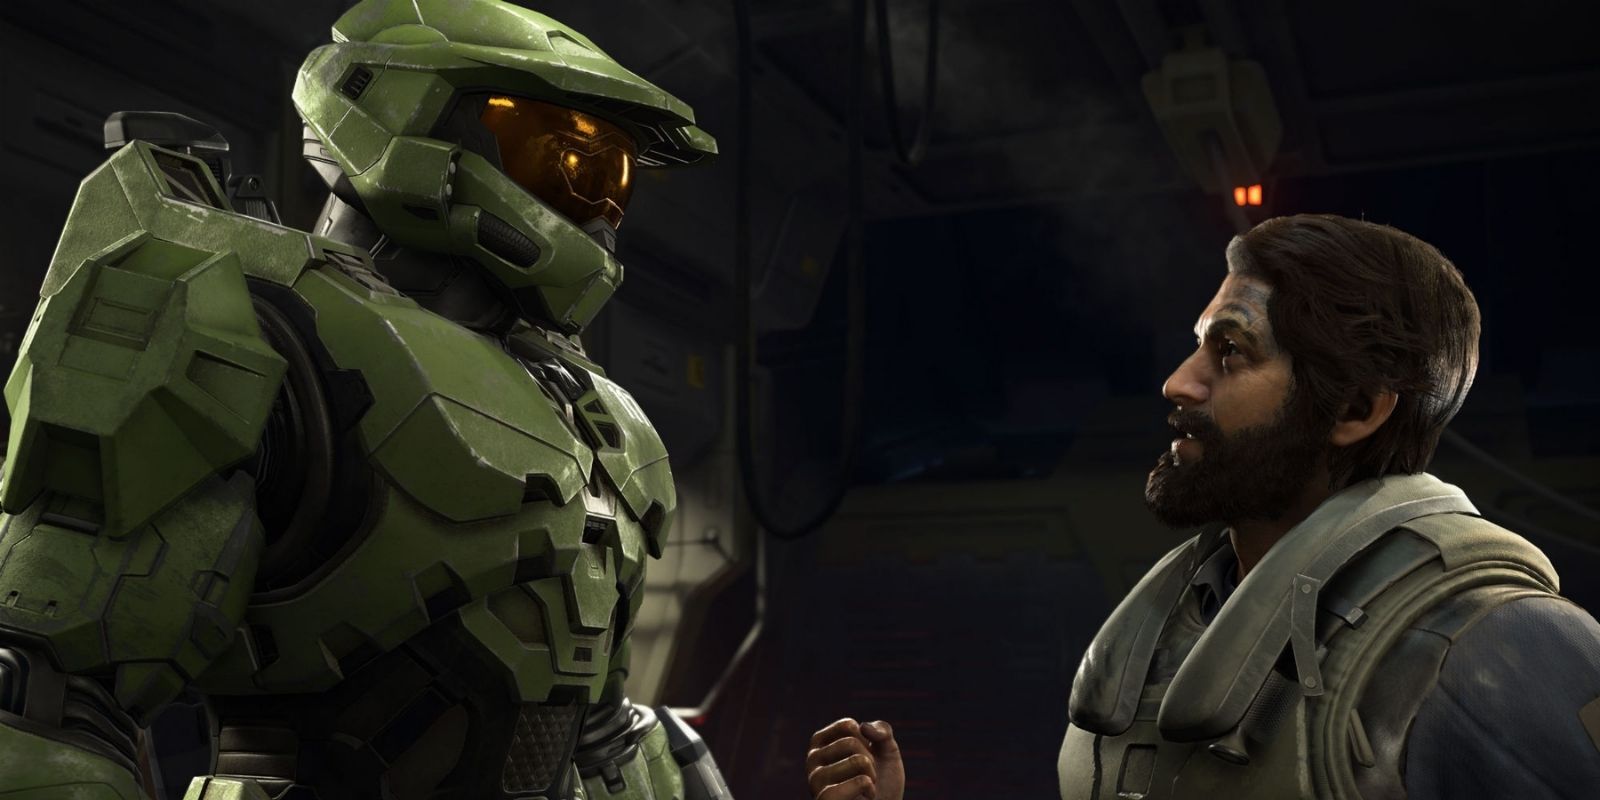 Master Chief in conversation with a civilian in Halo Infinite